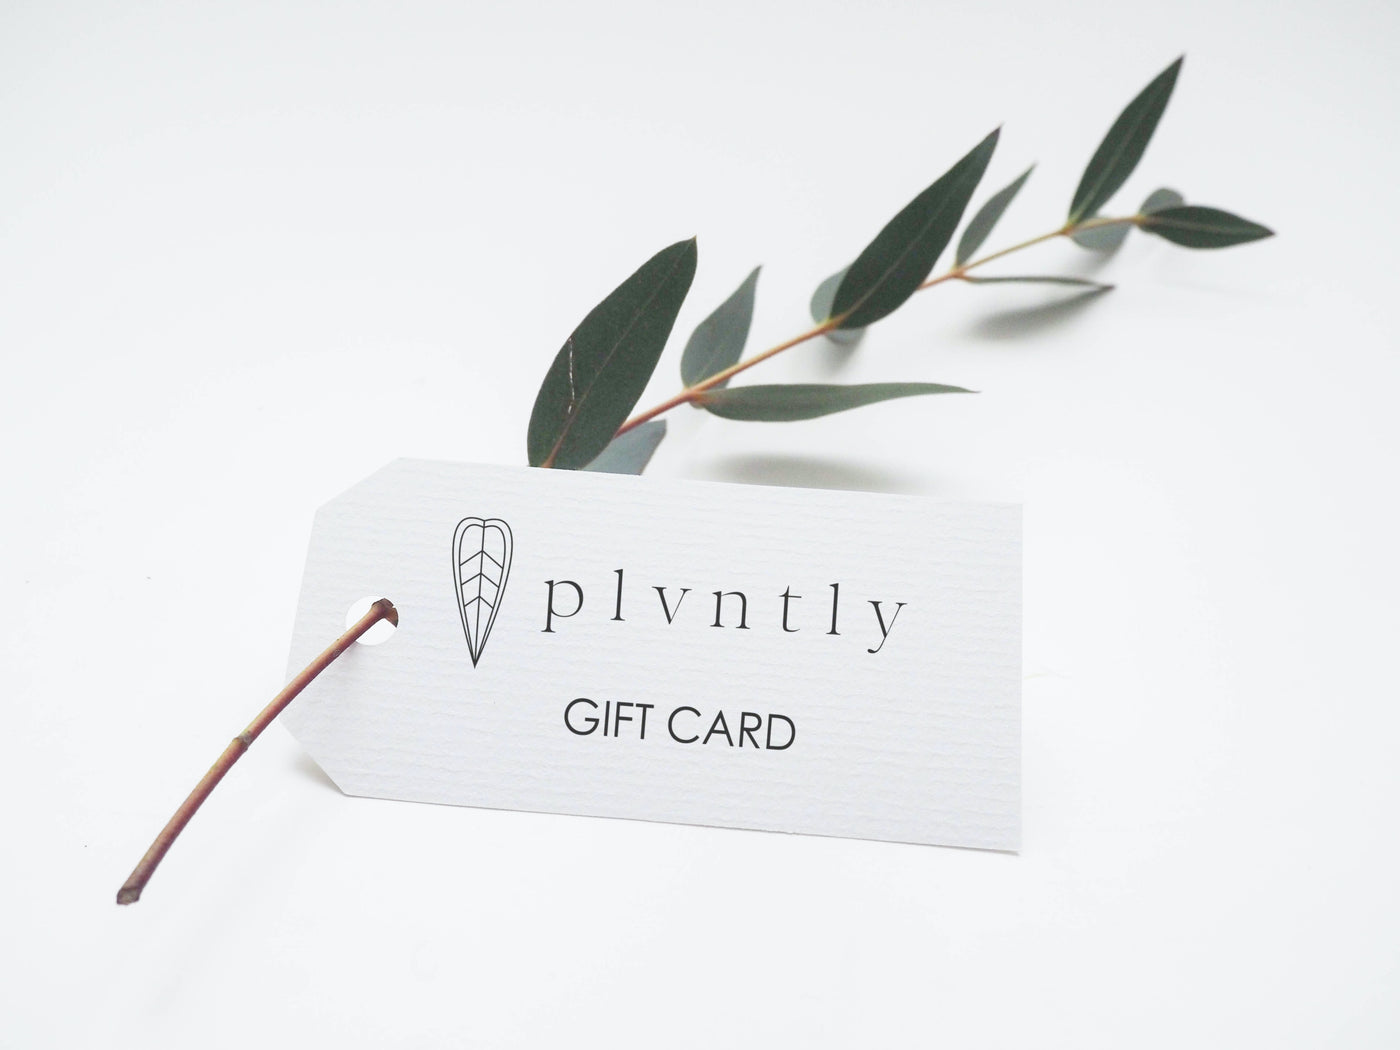 Plvntly Gift Card